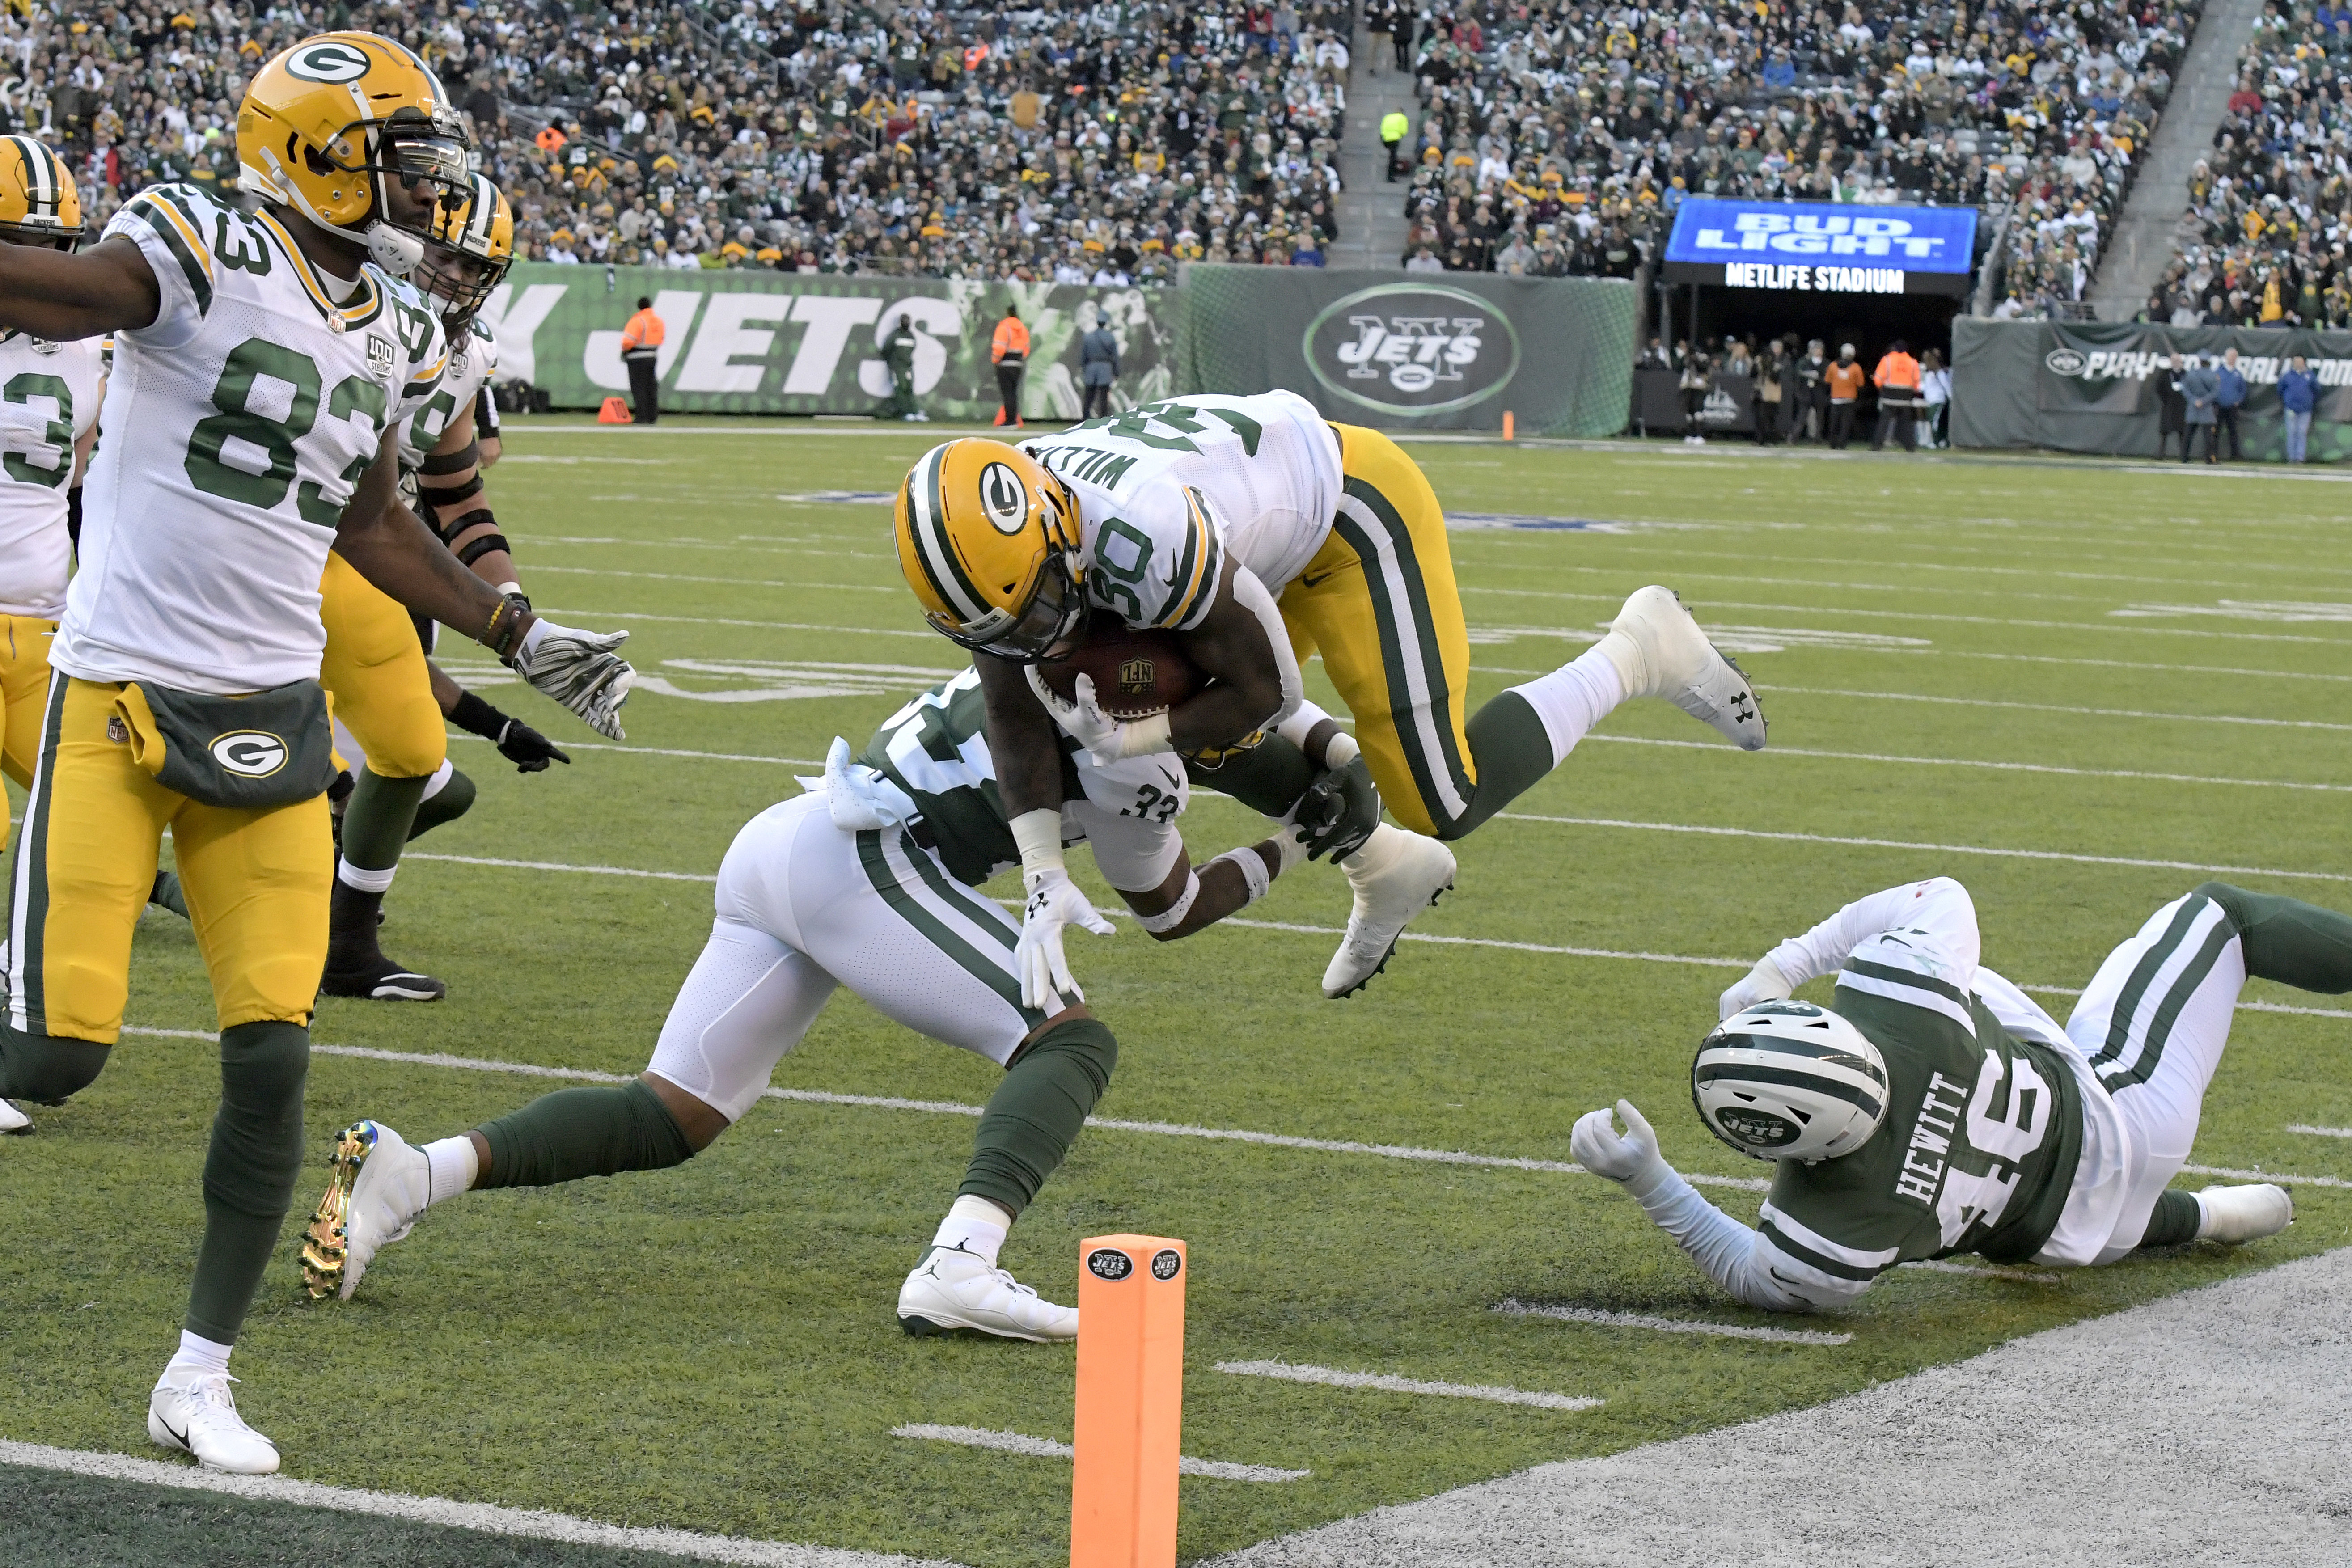 Williams' big game helps Packers finally get road win